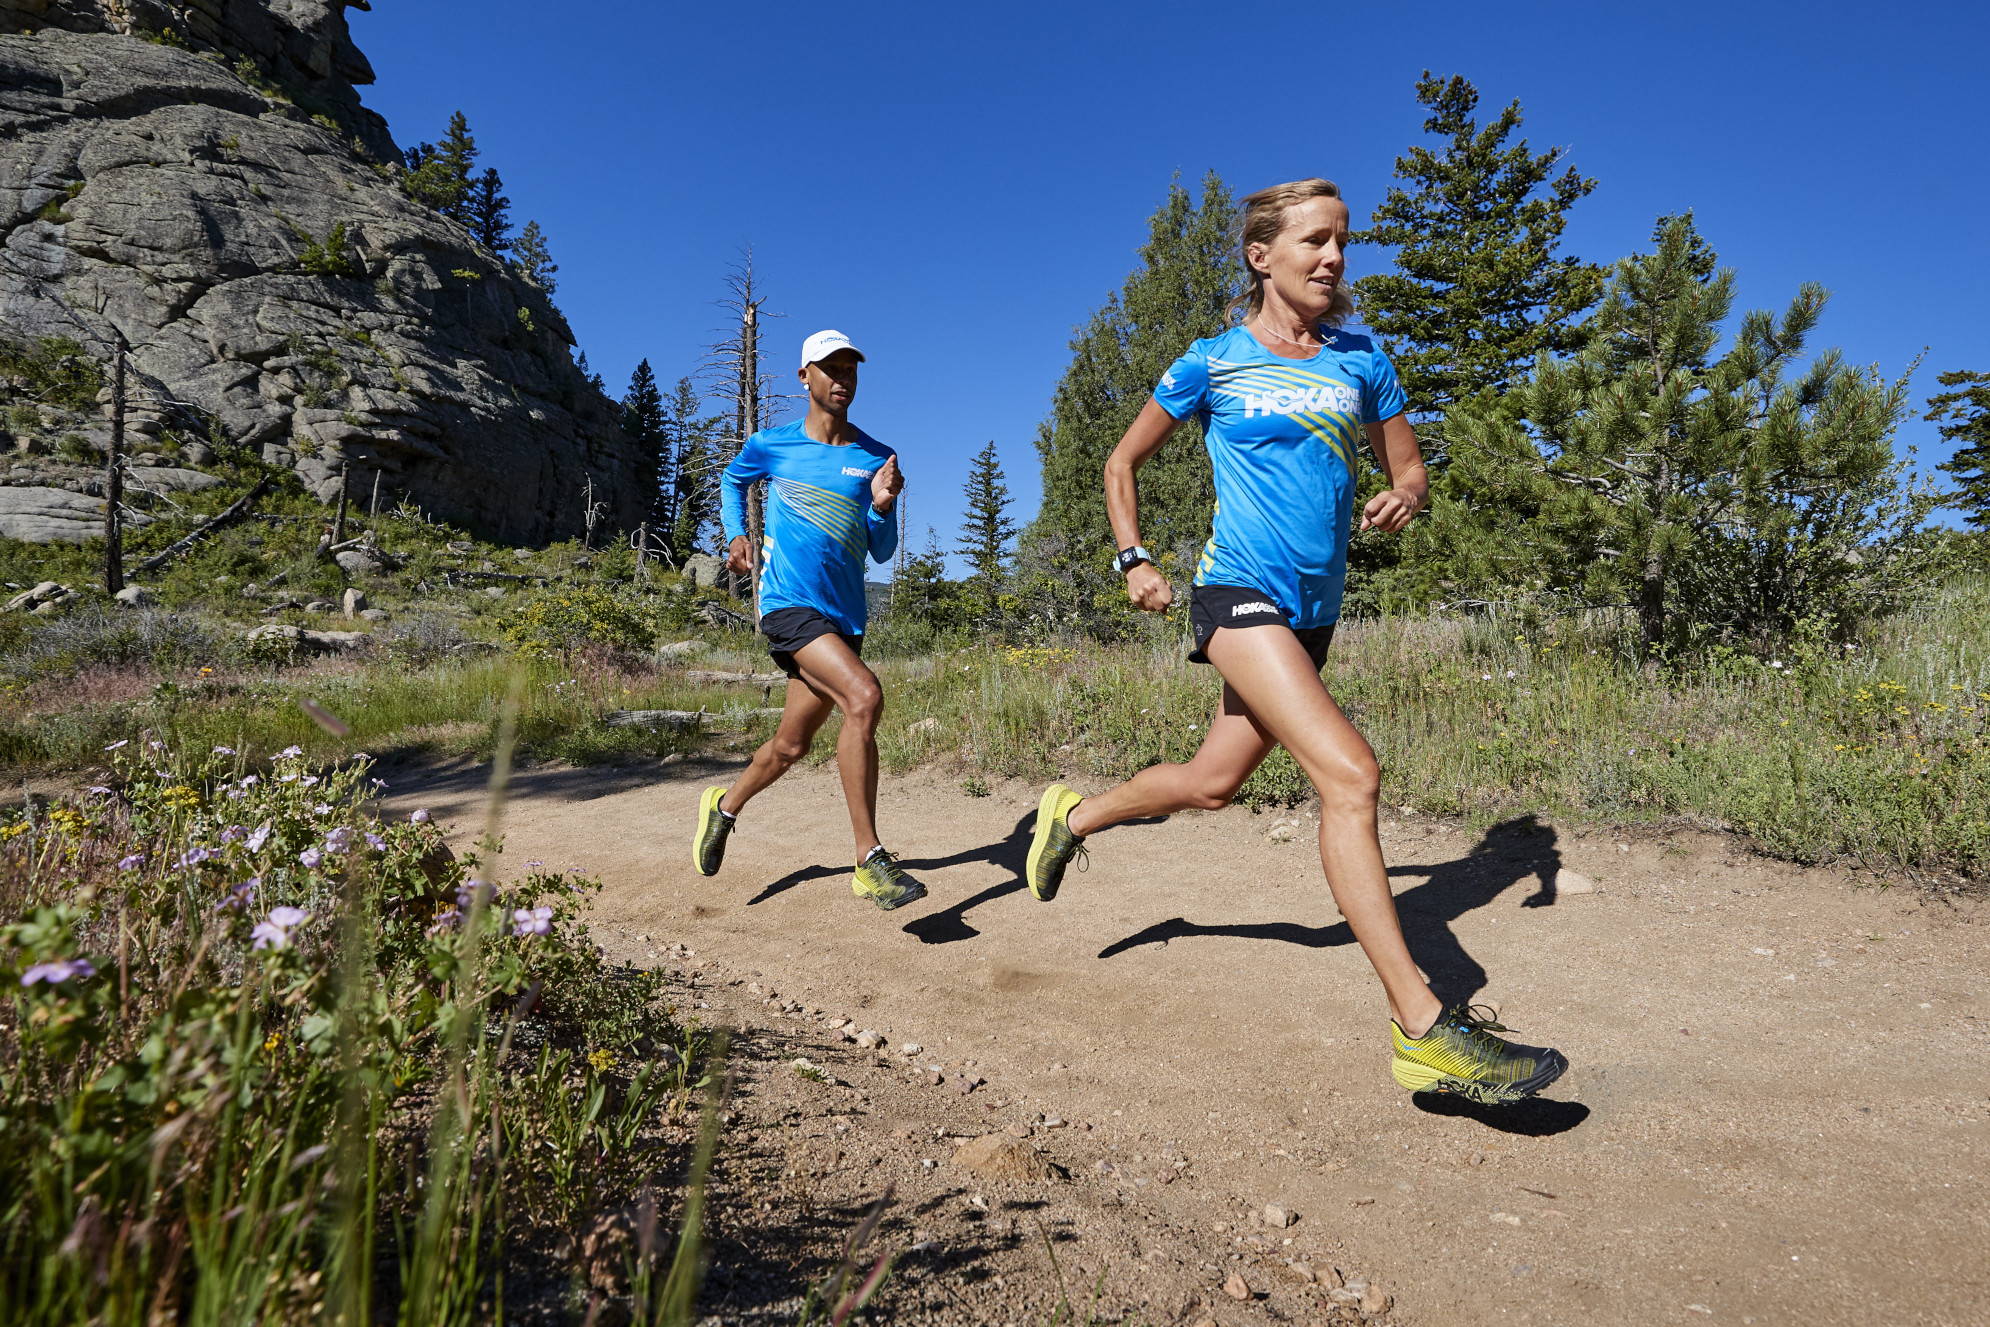 Tackle Your Toughest Trail Runs in New Hoka One One Evo Speedgoat Trail Running Shoes